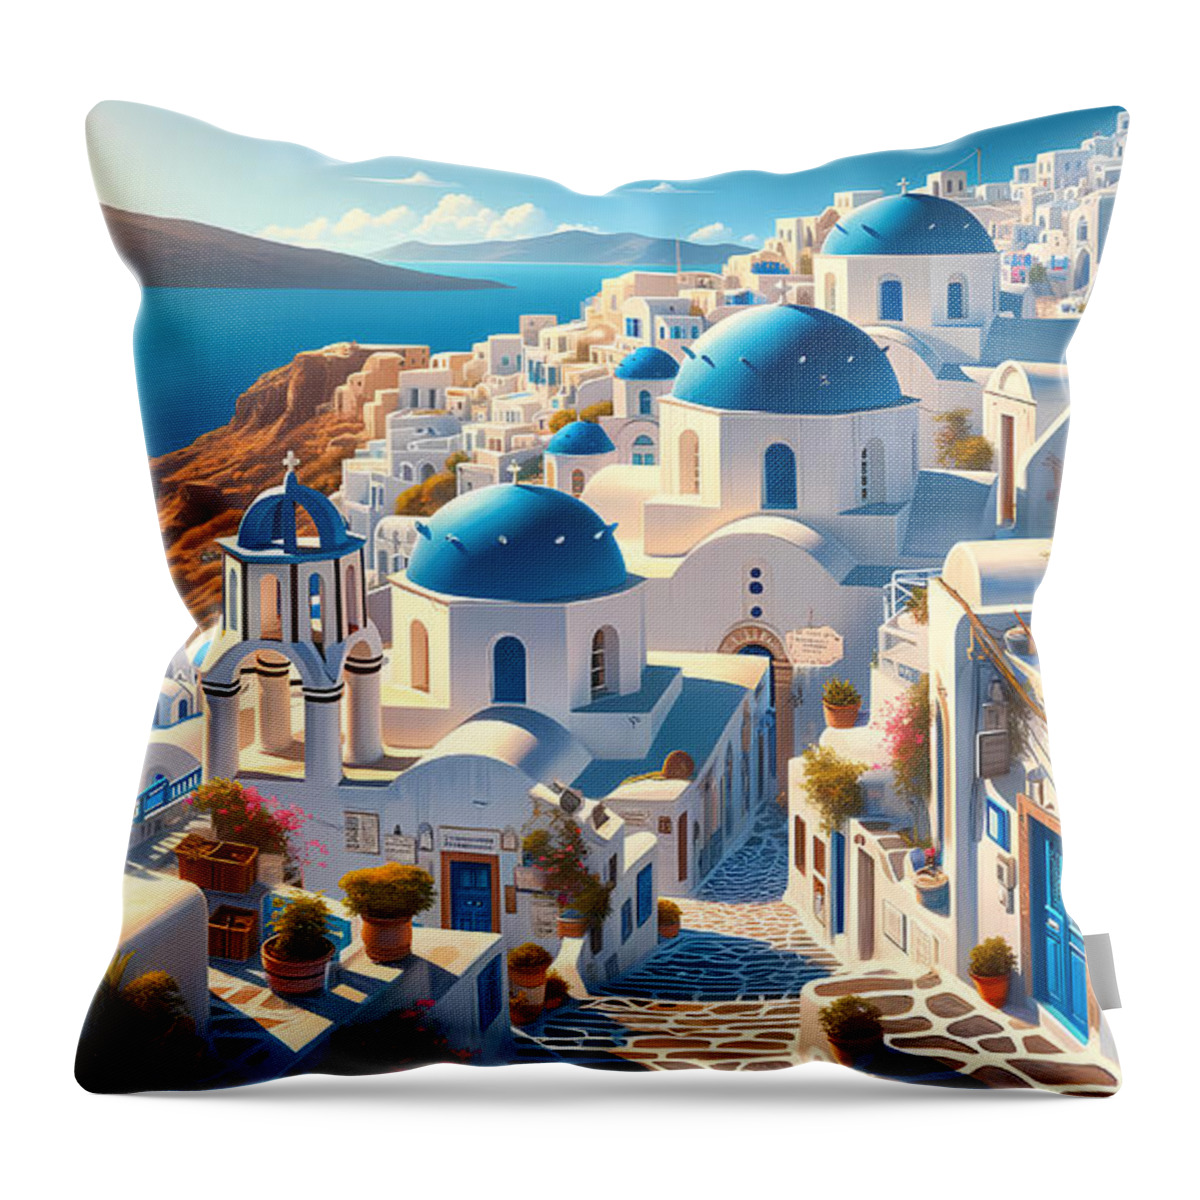 Greek Throw Pillow featuring the digital art Greek Island Village, Whitewashed buildings and blue domes in a beautiful Greek island village by Jeff Creation